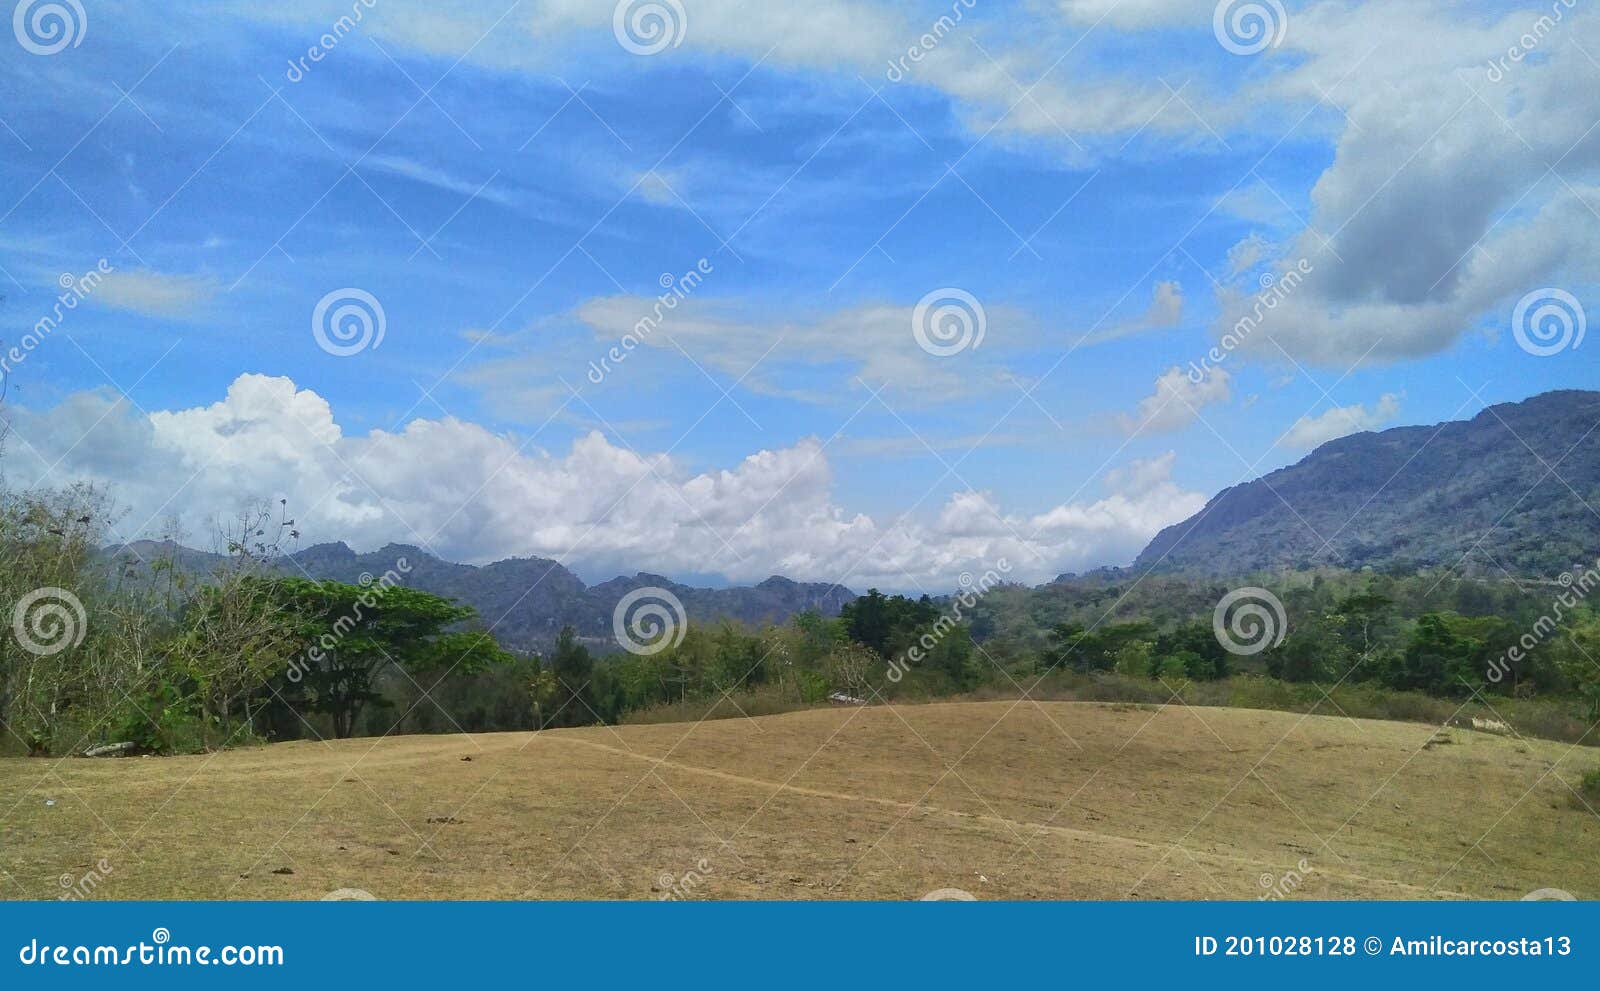 asalaitula forest and mundo perdido mountain with blue sky during sunny day, timor-leste